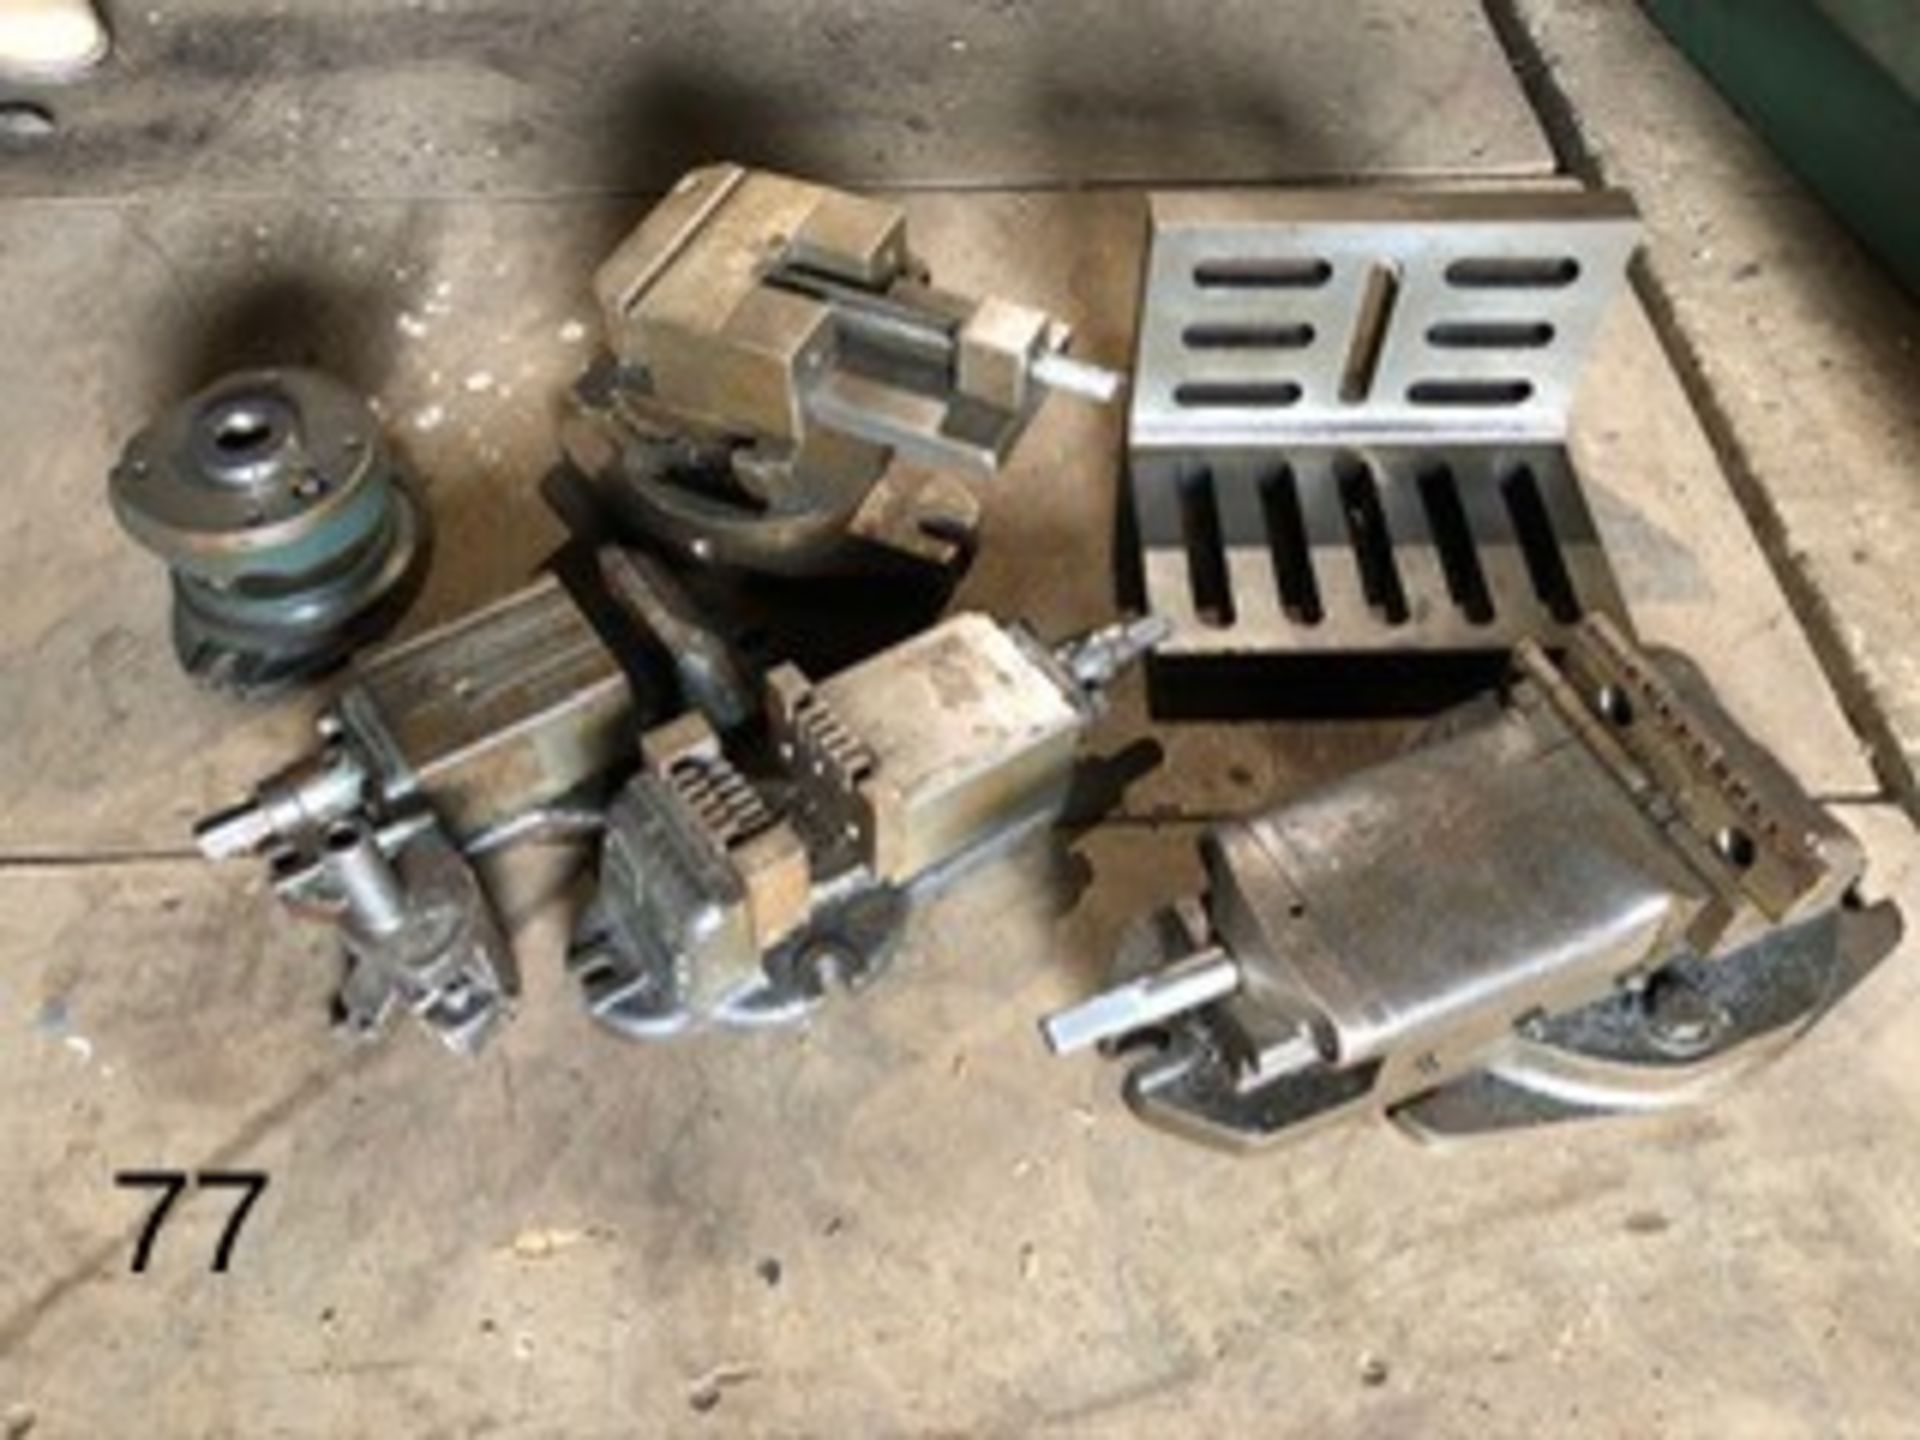 5 sets of lathe tools and equipment. Stored near Gorleston, Norfolk No VAT on this item.